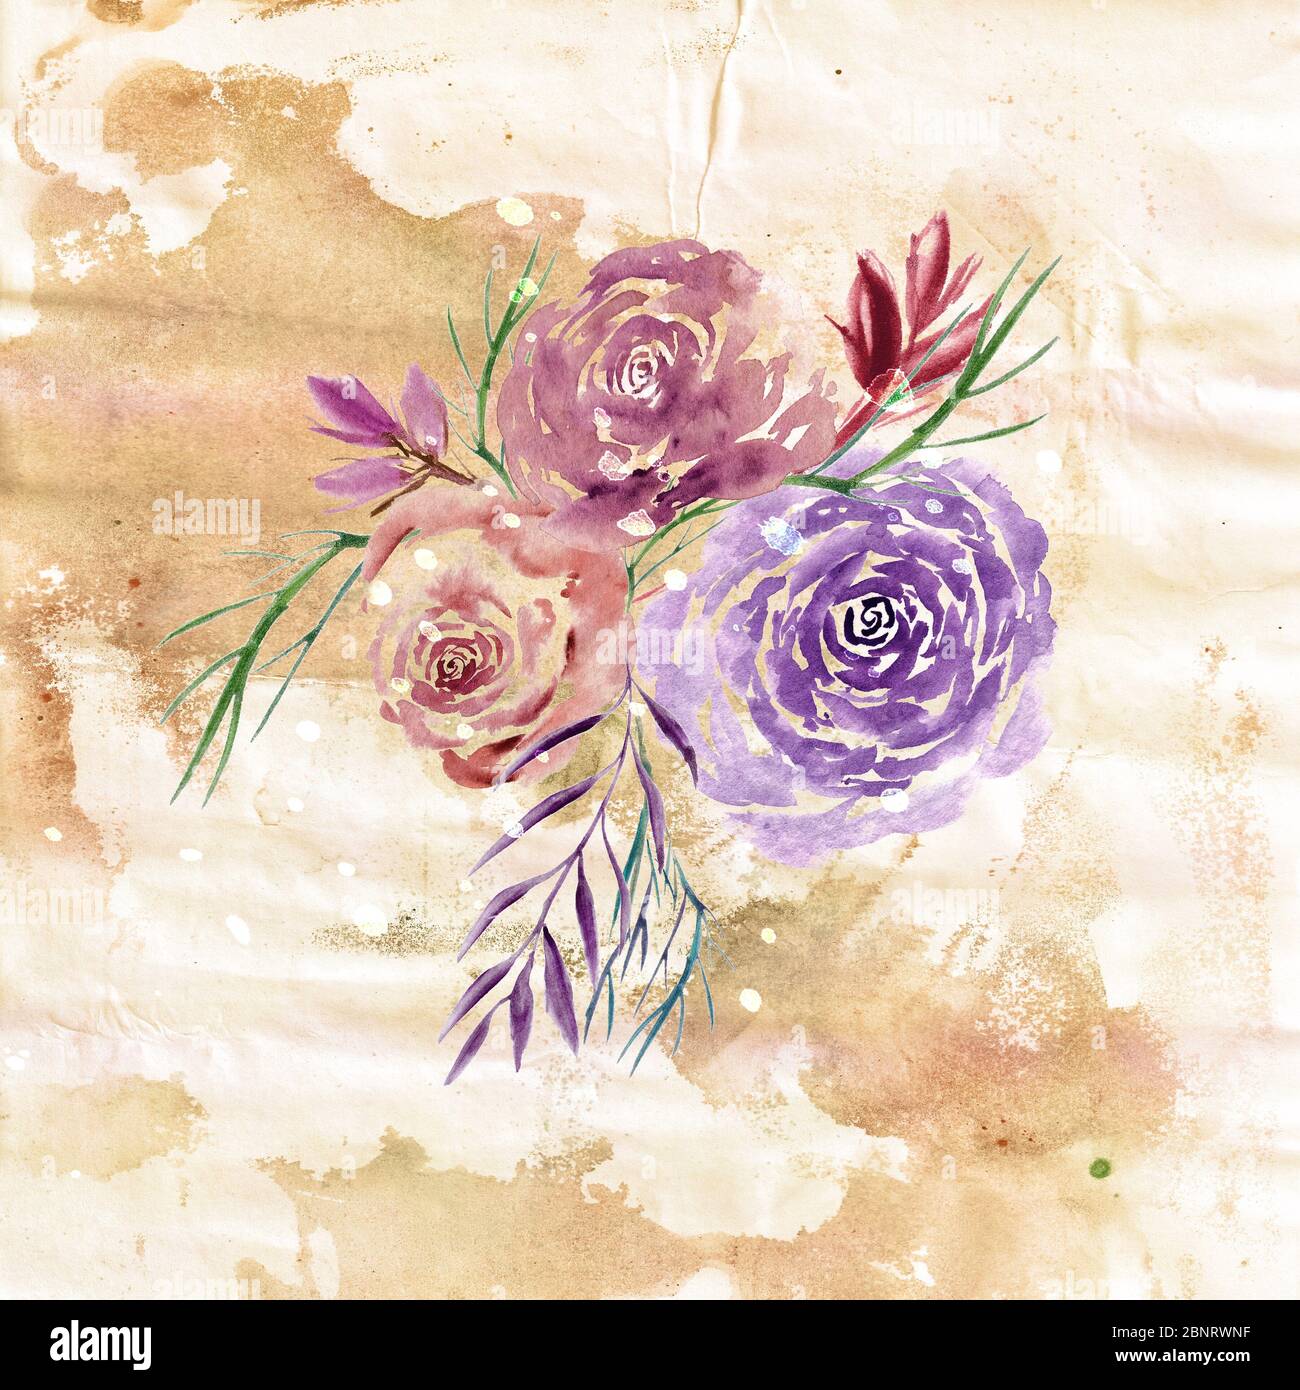 Watercolor floral illustration. Grunge watercolor paper. Rustic ink textured art. Good for greetings, wedding or invitation cards, backgrounds. Stock Photo